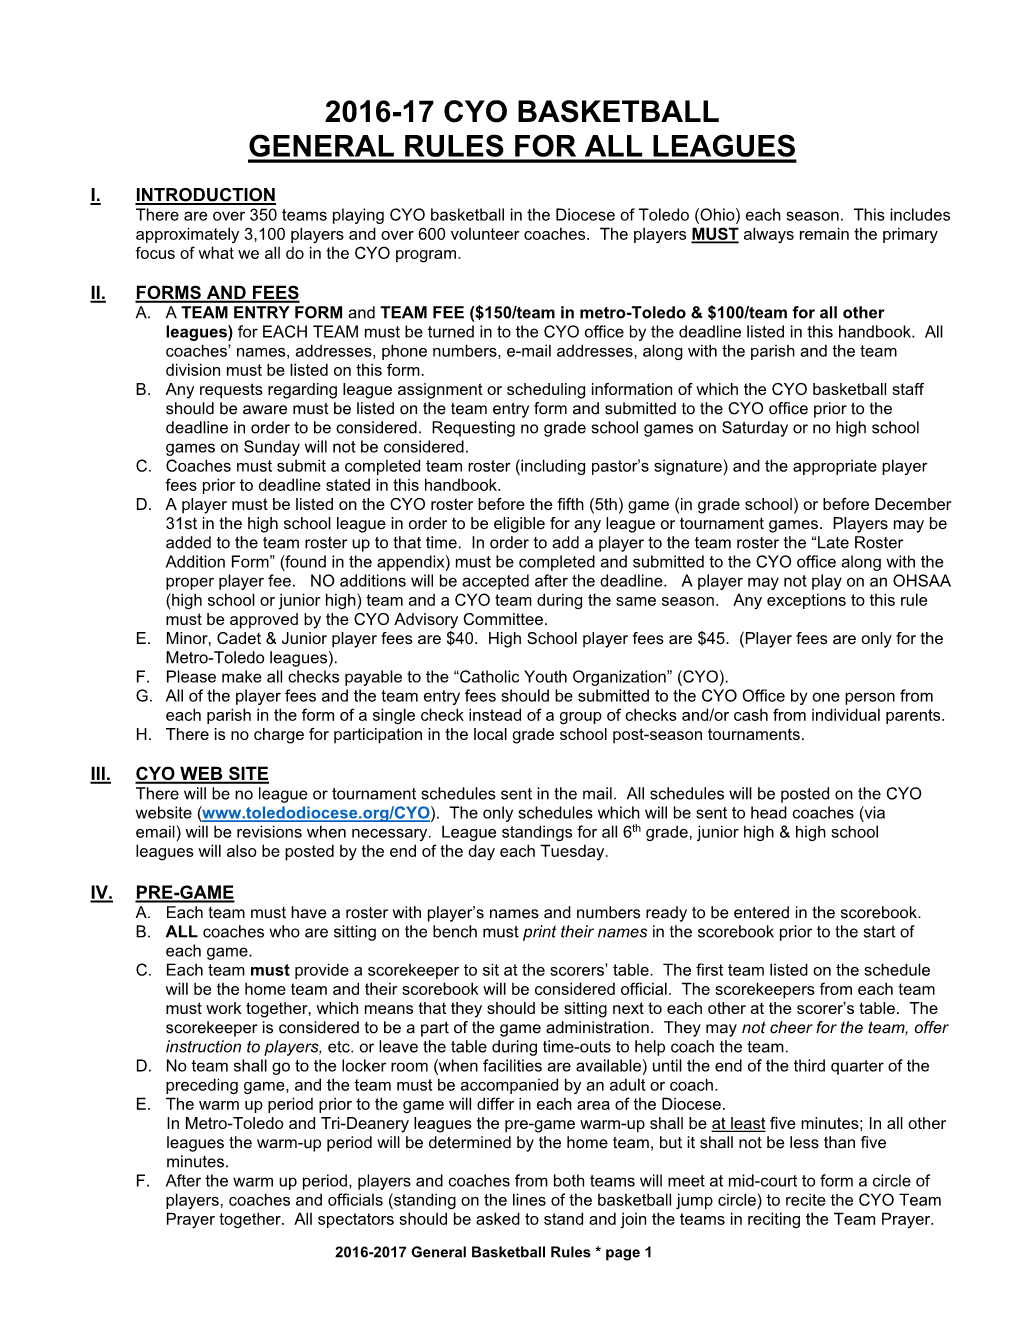 2016-17 Cyo Basketball General Rules for All Leagues